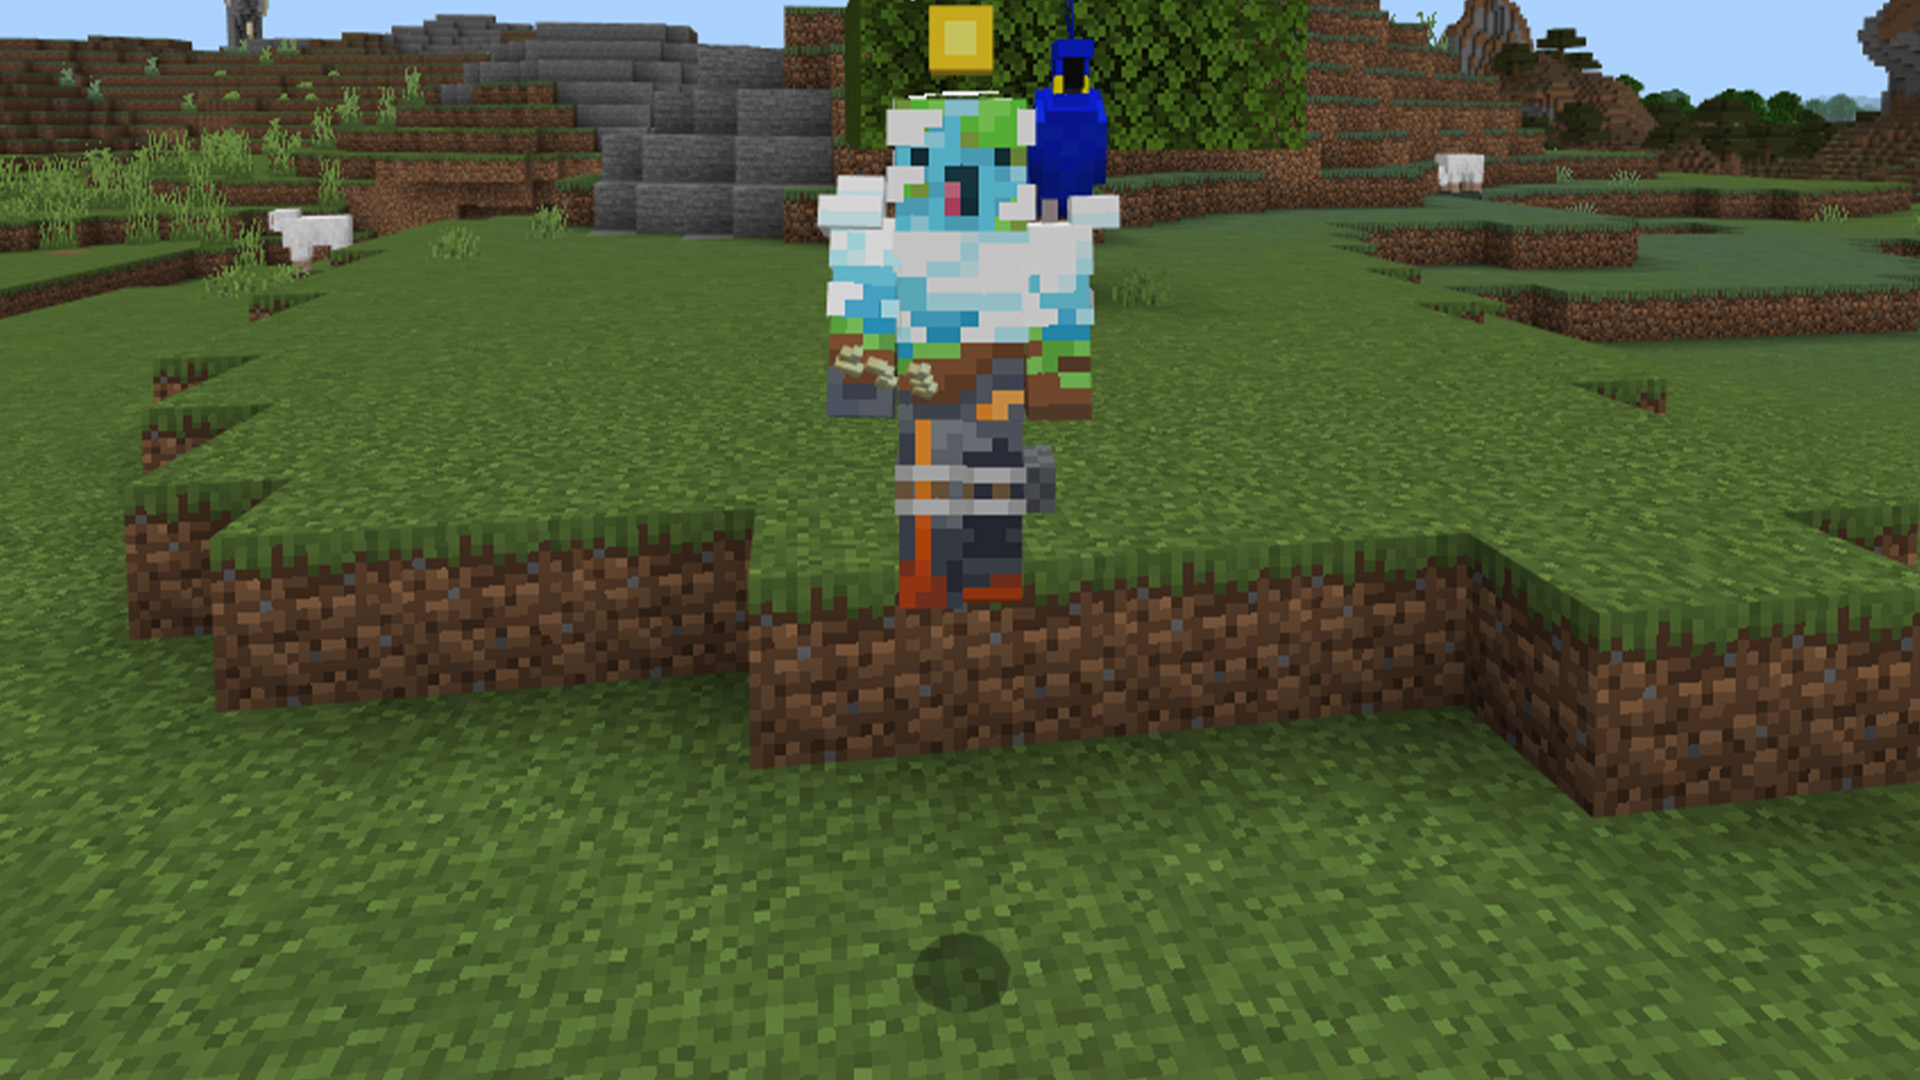 Jumping with parrot in Minecraft